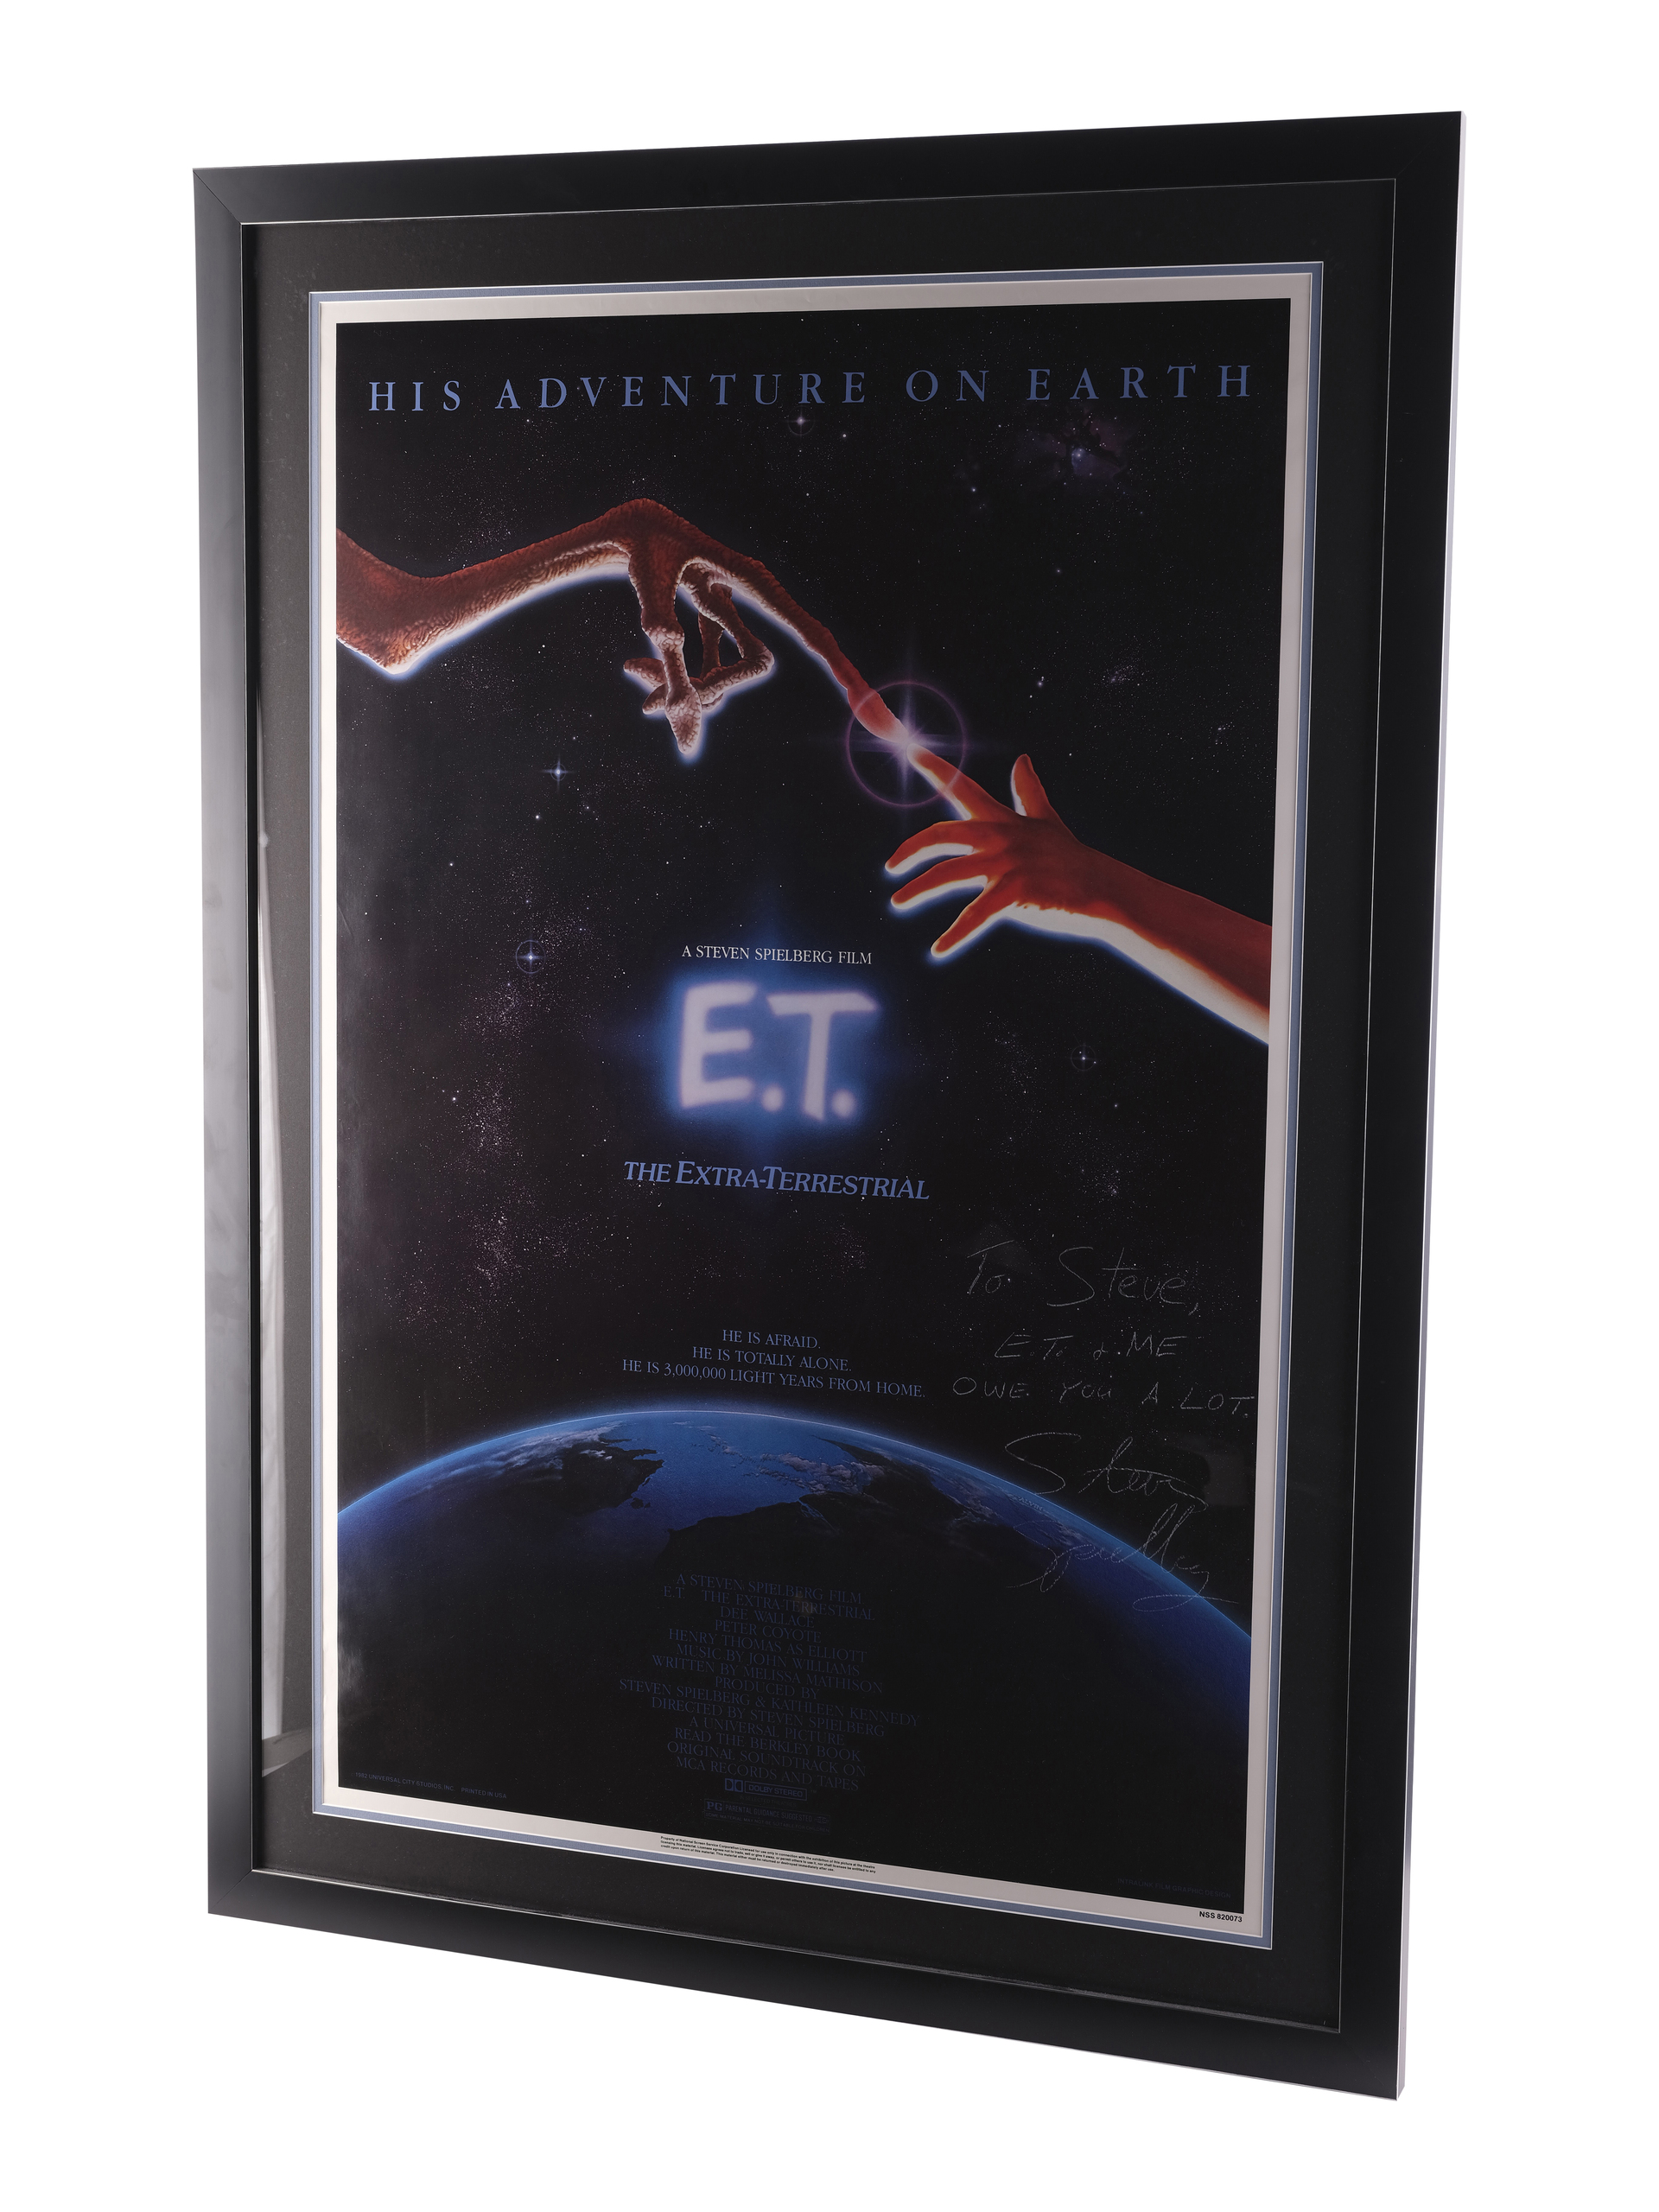 E.T. THE EXTRA-TERRESTRIAL (1982) - Framed Steven Spielberg-Autographed "Touching Fingers" One-Sheet - Image 3 of 5